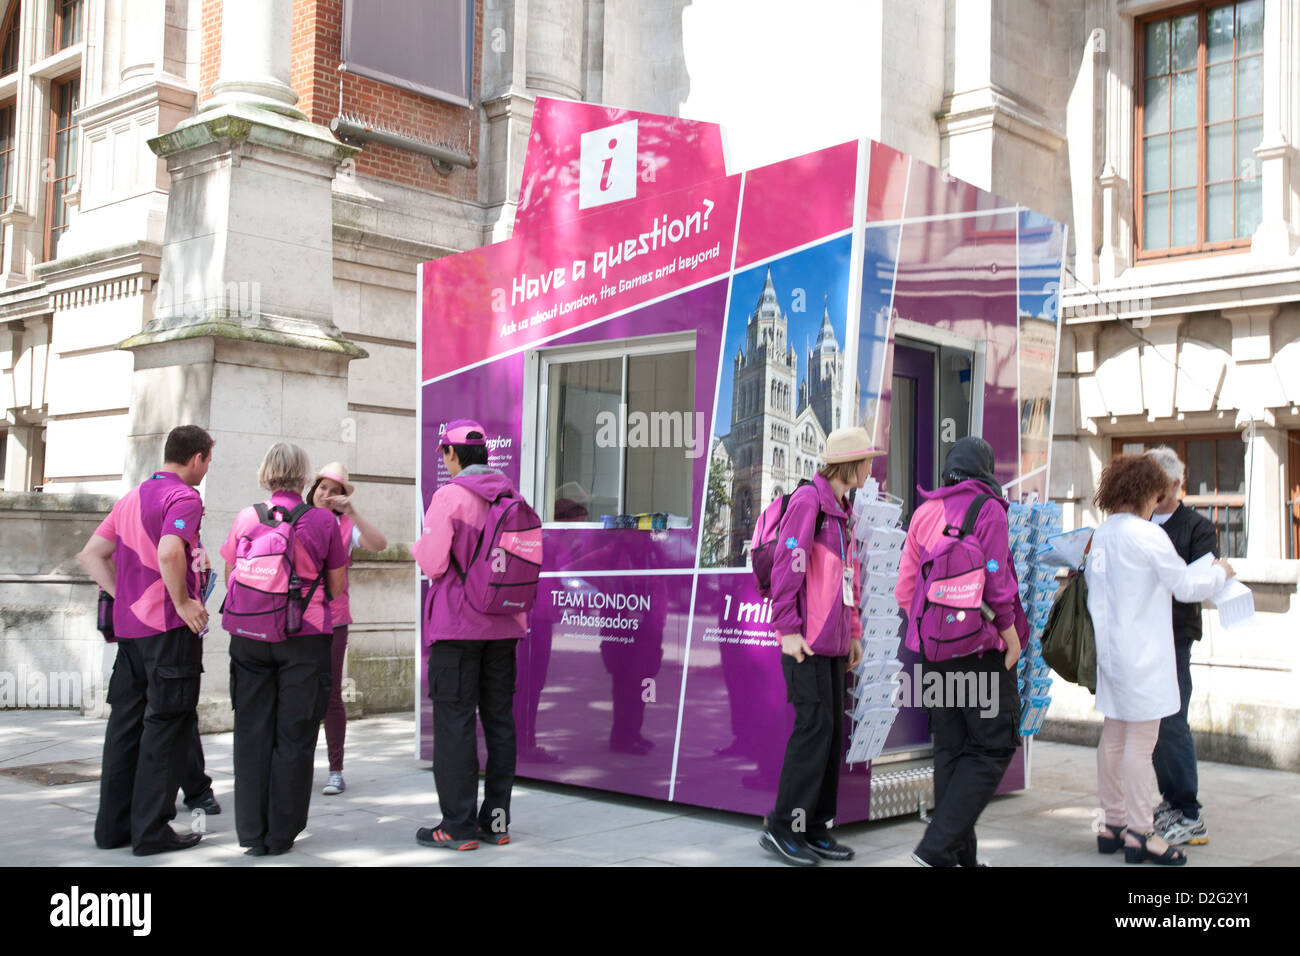 London 2012 Olympics gamesmakers standing at information stand, Old Brompton Road, Kensington, London, England, United Kingdom Stock Photo